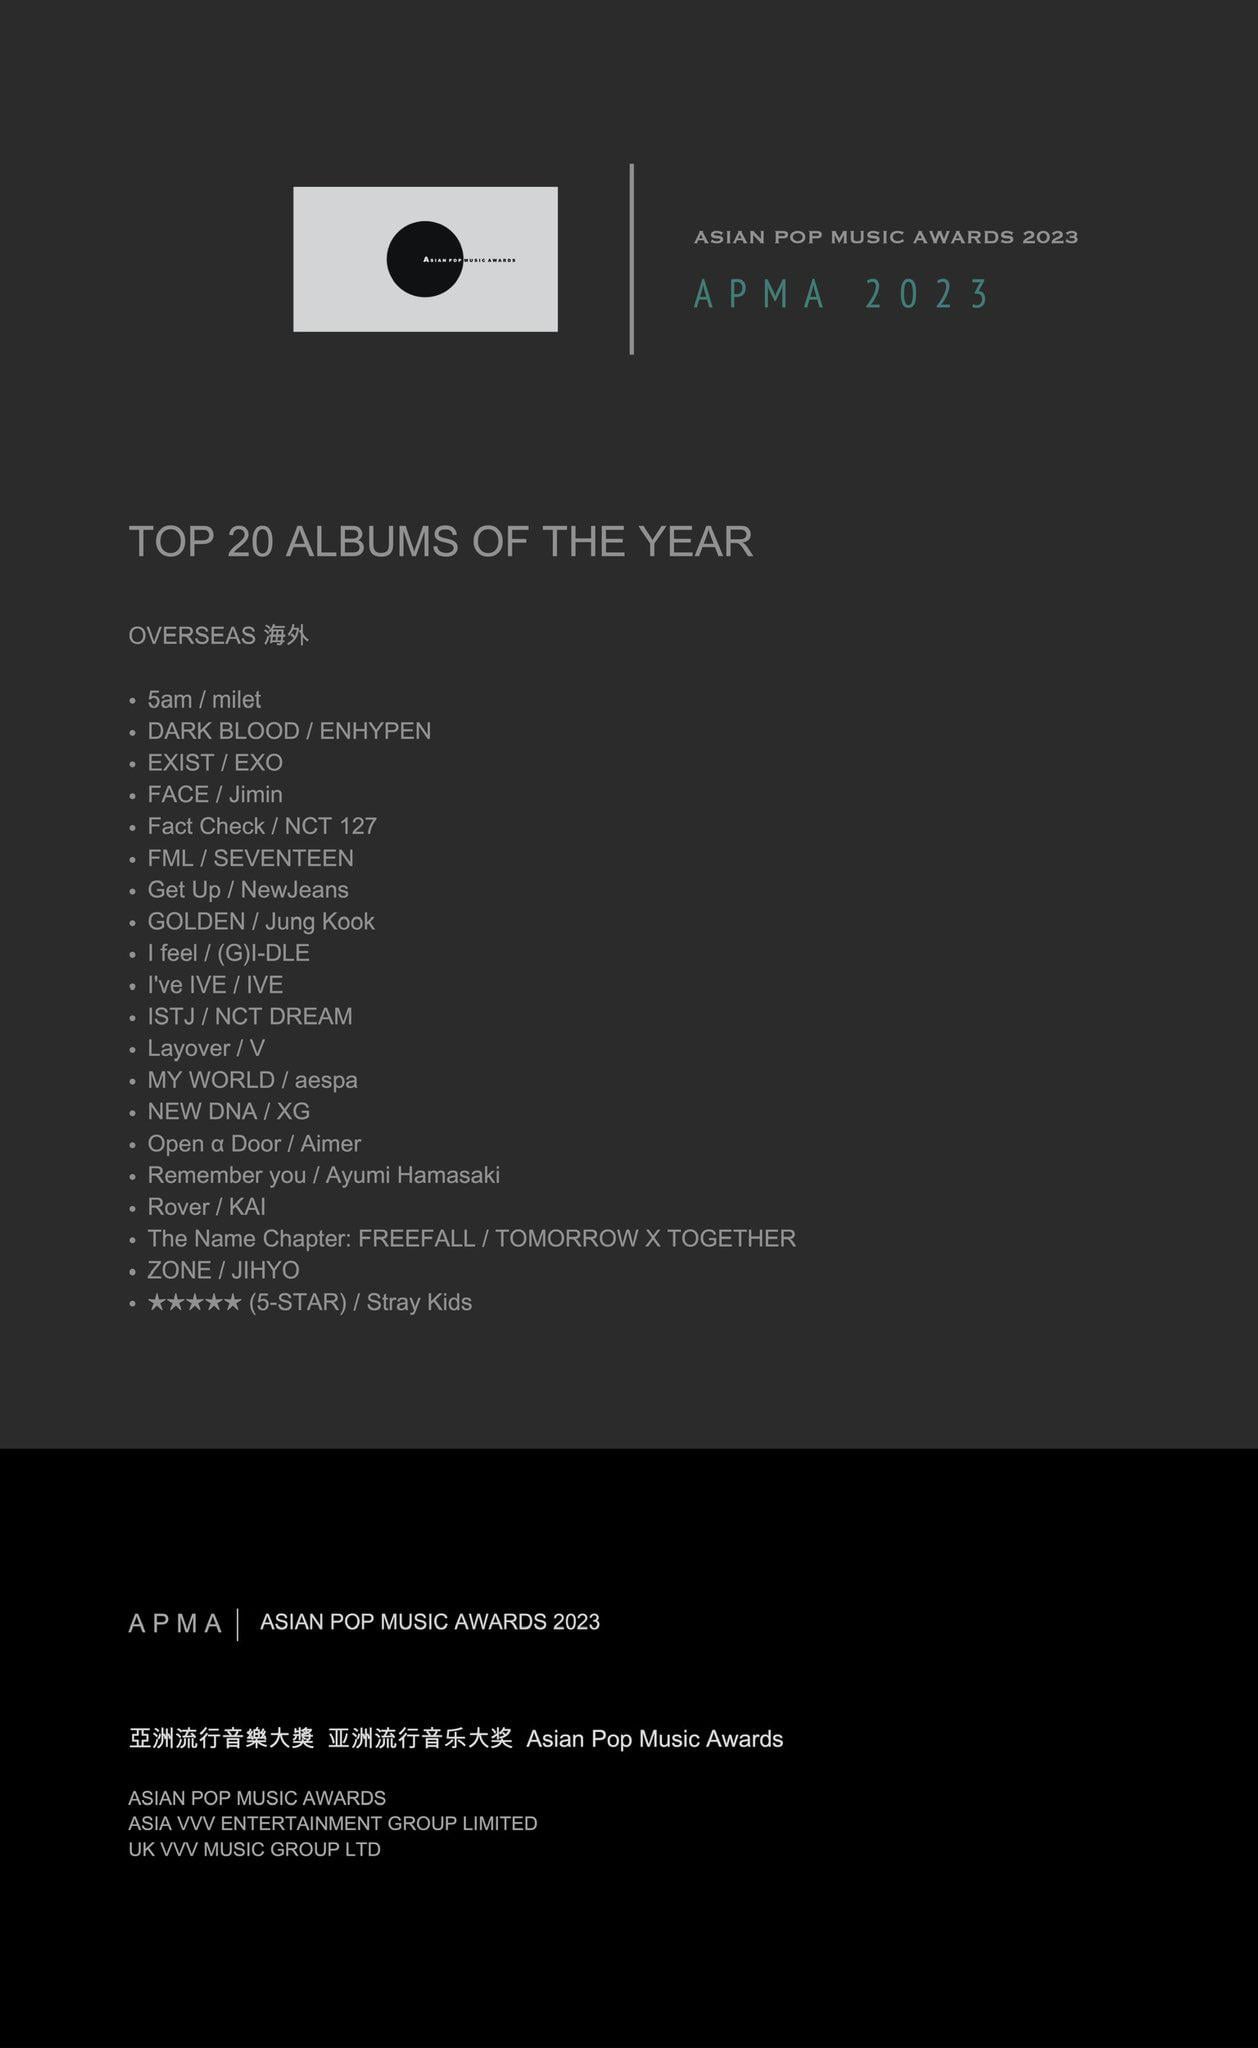 231227 'Dark Blood' by ENHYPEN was one of the "Top 20 Albums of the Year" (Overseas) at the Asian Pop Music Awards 2023